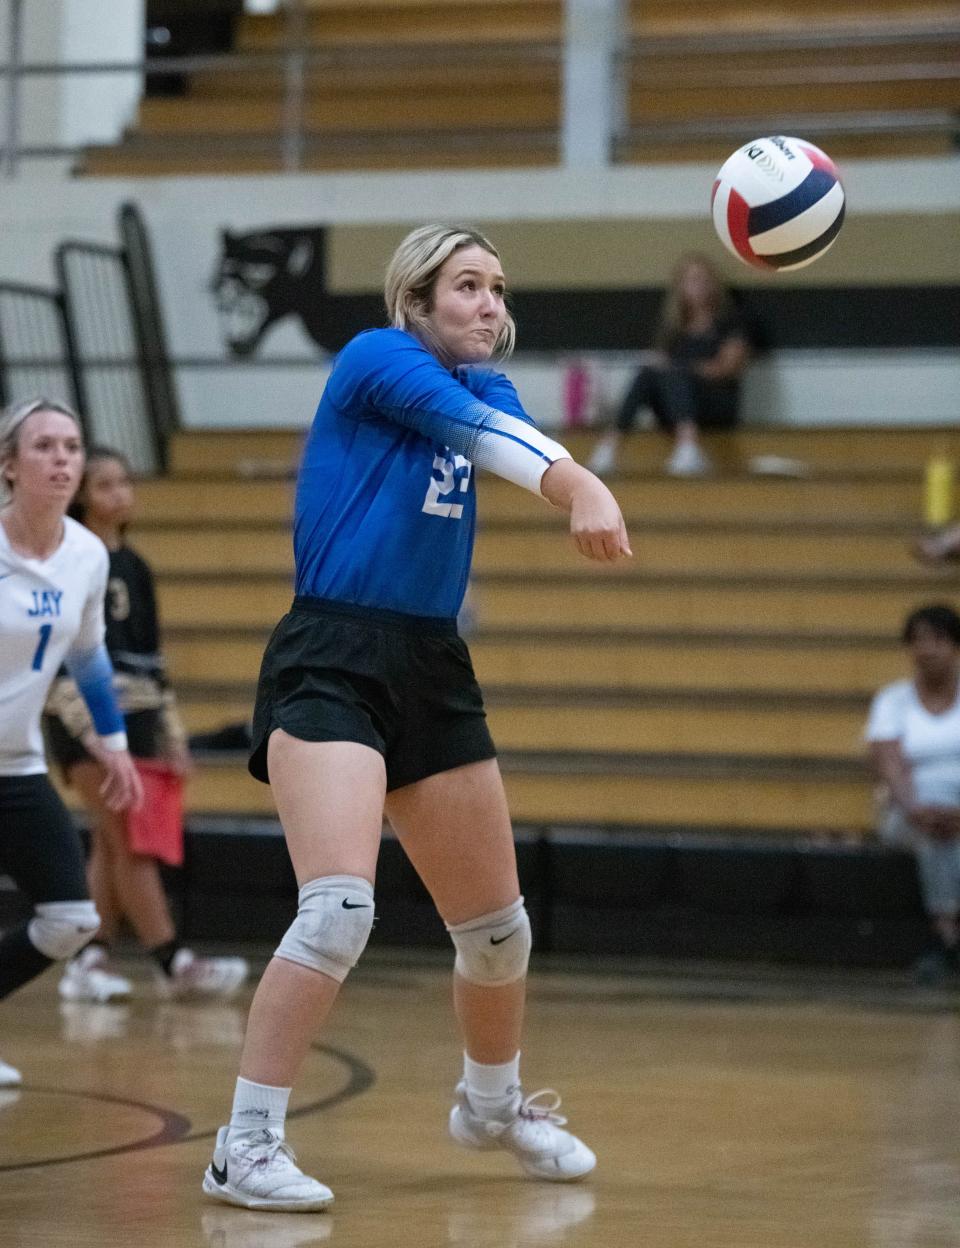 Brooklyn Sorrells (23) plays the ball during the Jay vs Milton volleyball match at Milton High School on Thursday, Sept. 21, 2023.